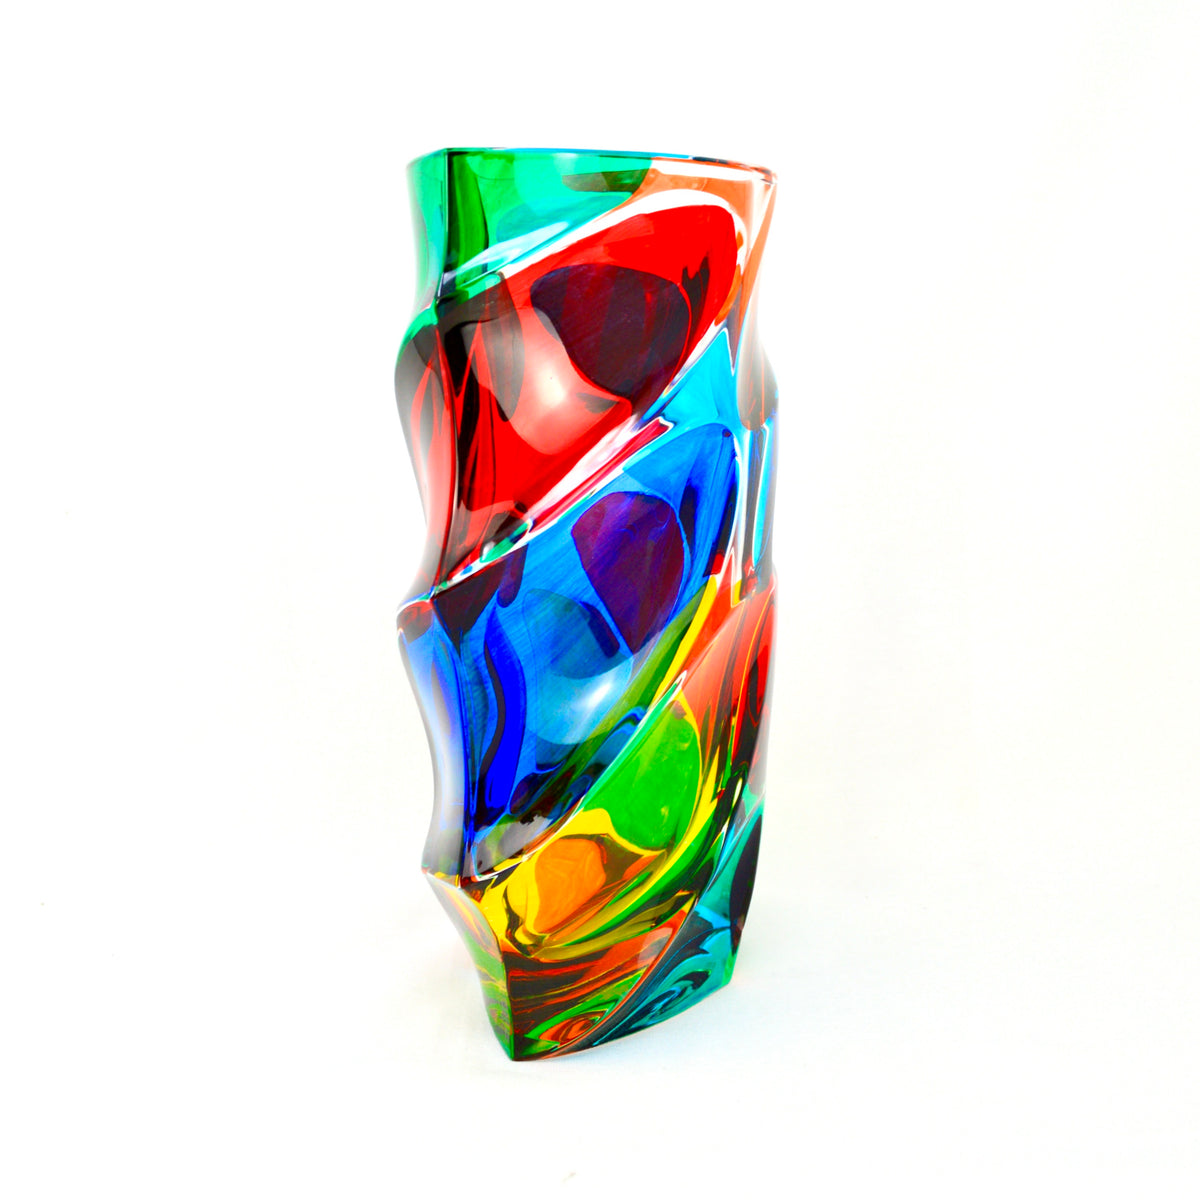 Caly Luxury Vase, Hand Painted Crystal, Made in Italy - My Italian Decor